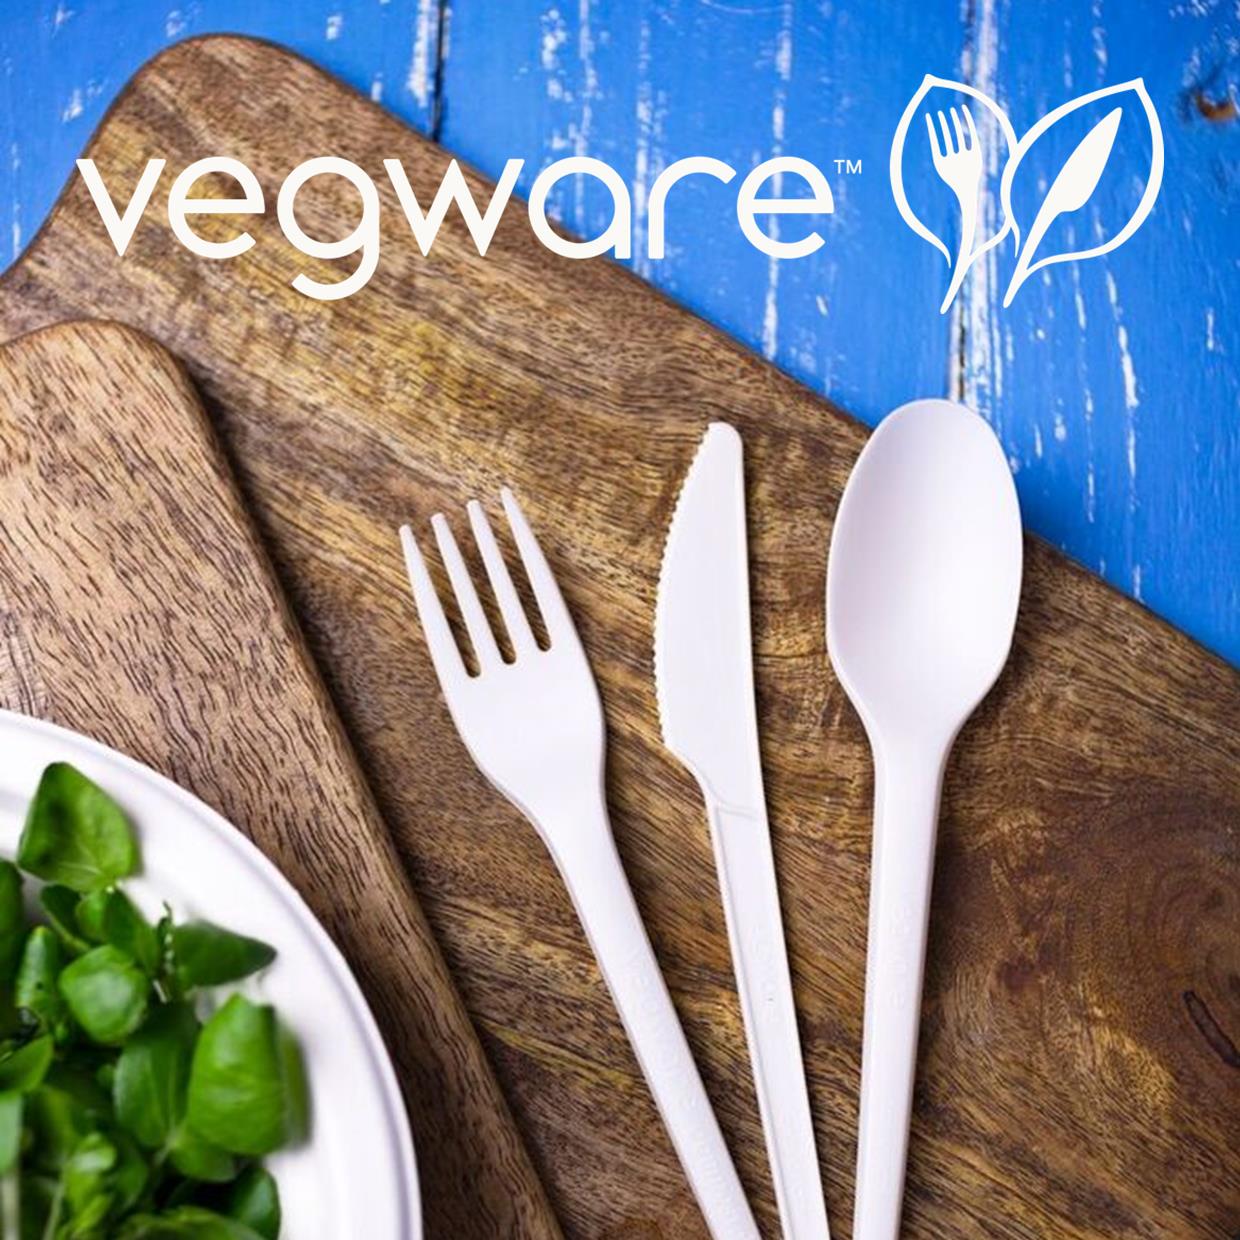 Vegware™ compostable 6.5in forks are made from plant-based CPLA and are independently certified to break down in  landfill within 12 weeks.  Off white color, they are ideal for hot and cold food.